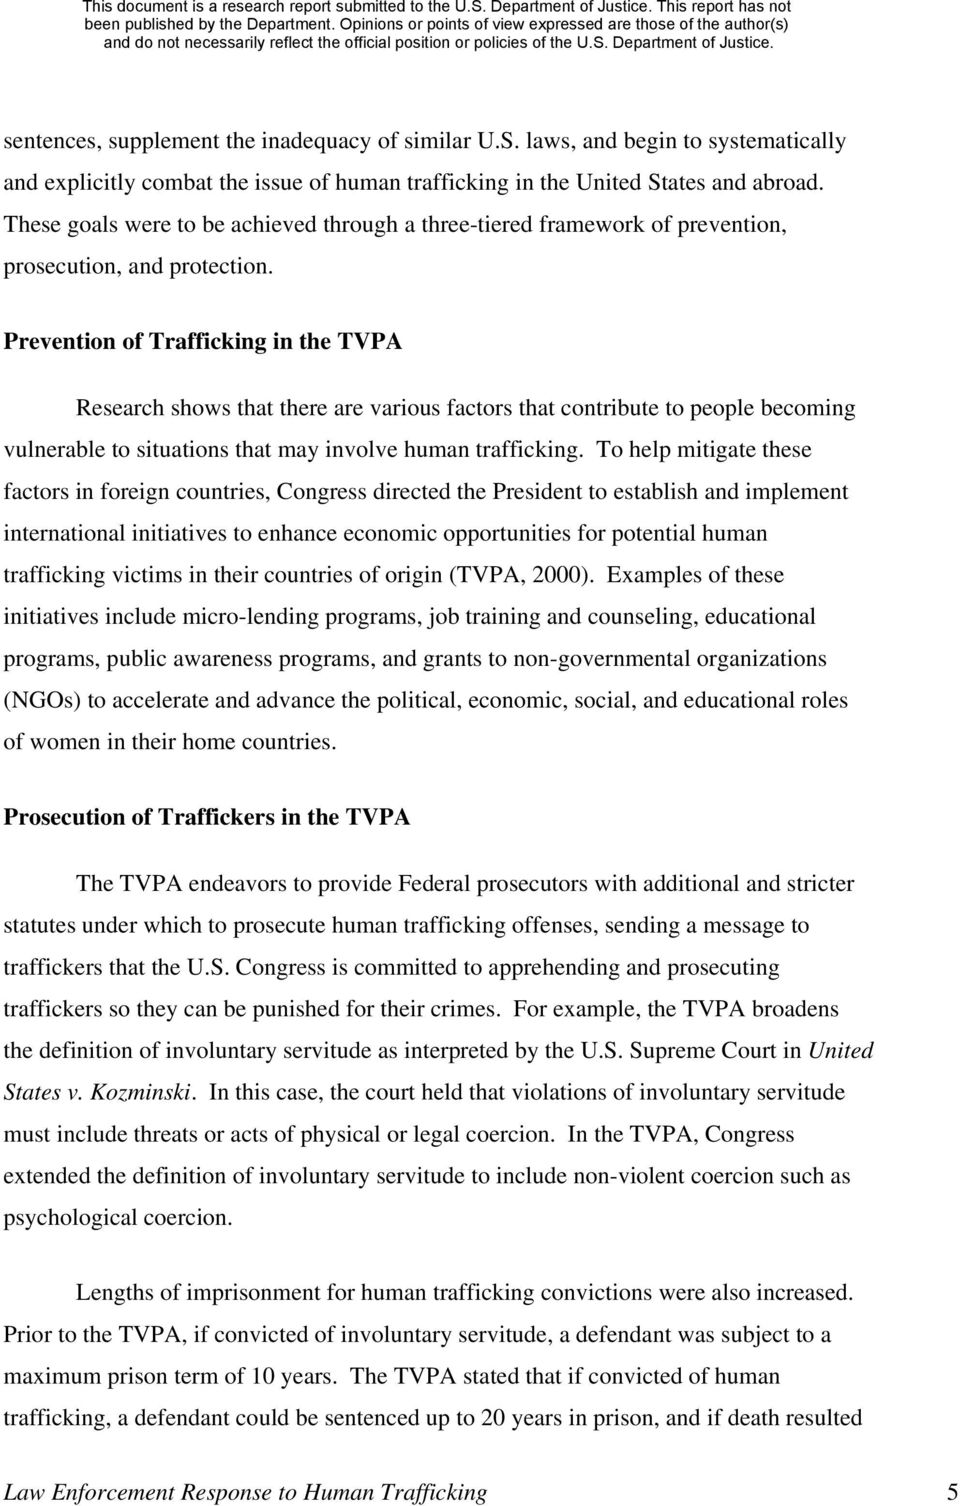 Prevention of Trafficking in the TVPA Research shows that there are various factors that contribute to people becoming vulnerable to situations that may involve human trafficking.